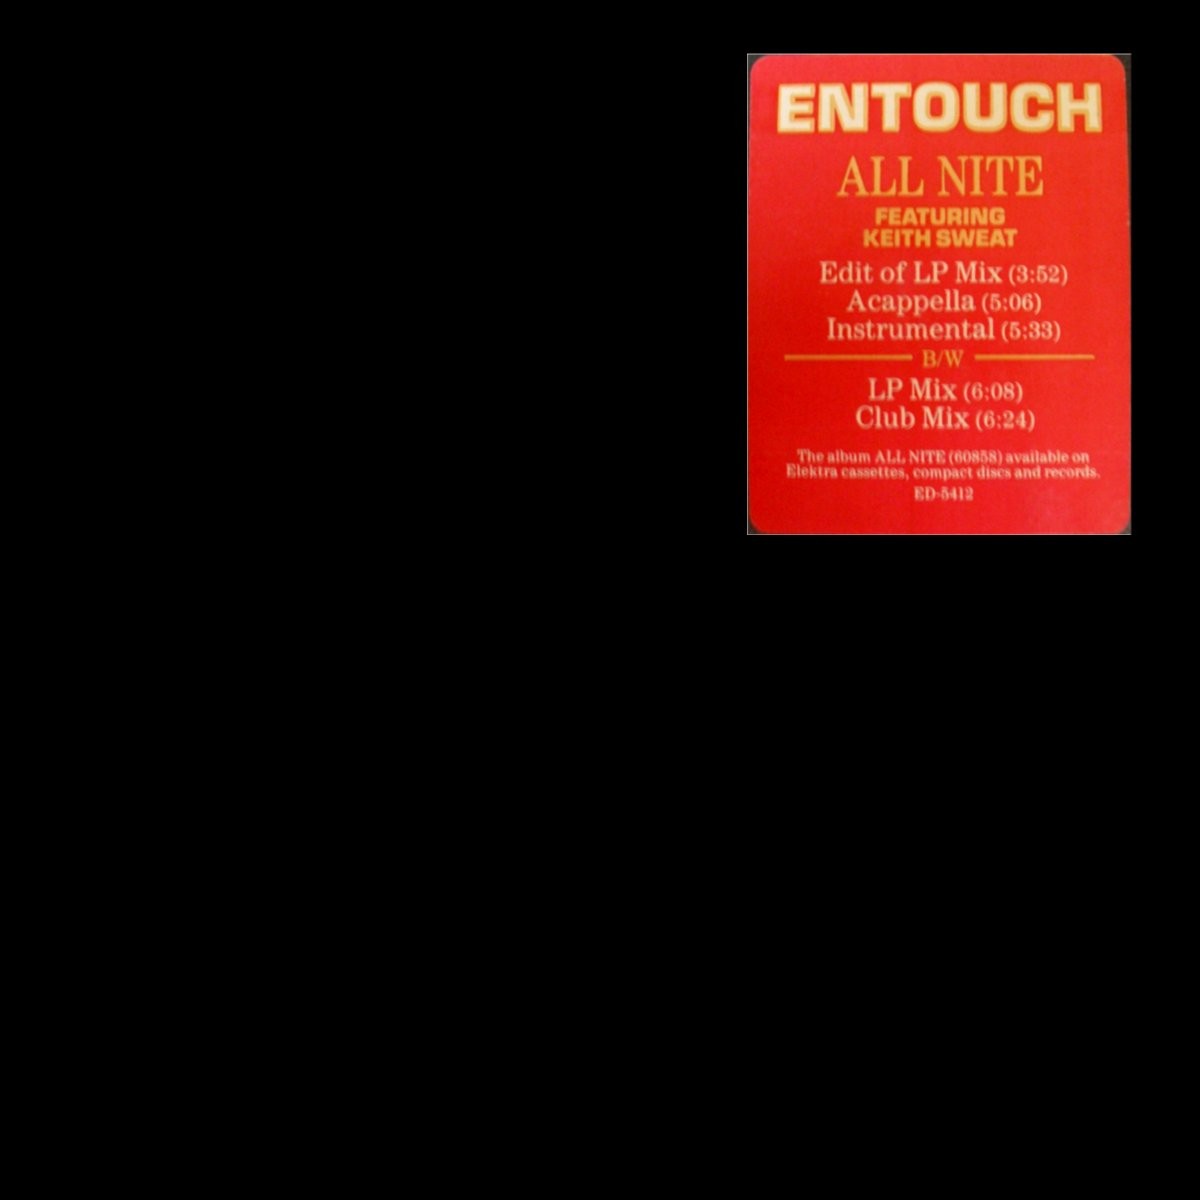 Entouch feat Keith Sweat - All nite (5 mixes) 12" Vinyl Promo